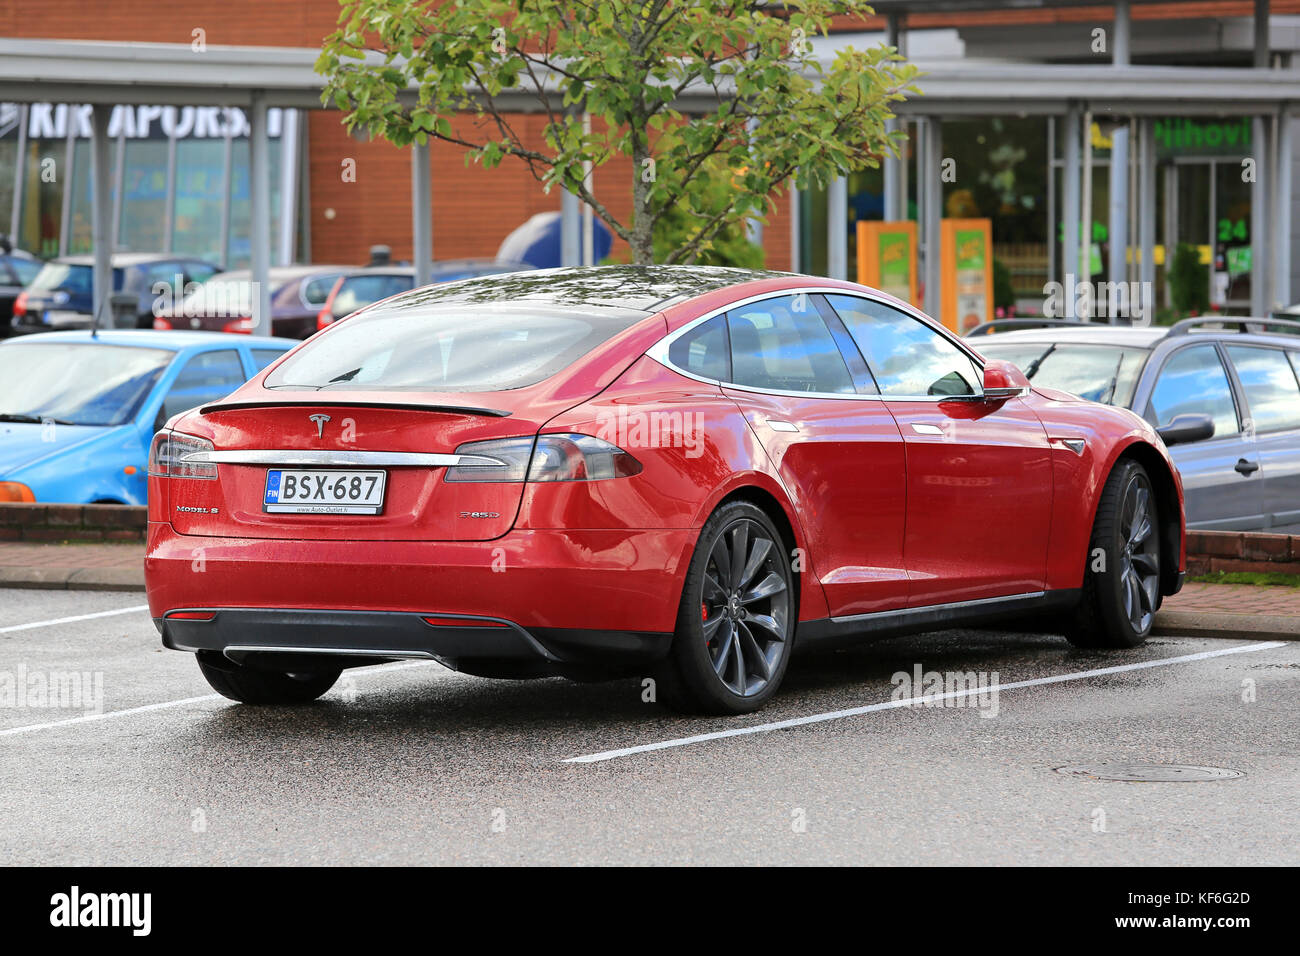 SALO, FINLAND - SEPTEMBER 5, 2015: Red Tesla Model S electric car parked at a station in Salo, Finland. According to Tesla, the P85D is c Photo - Alamy